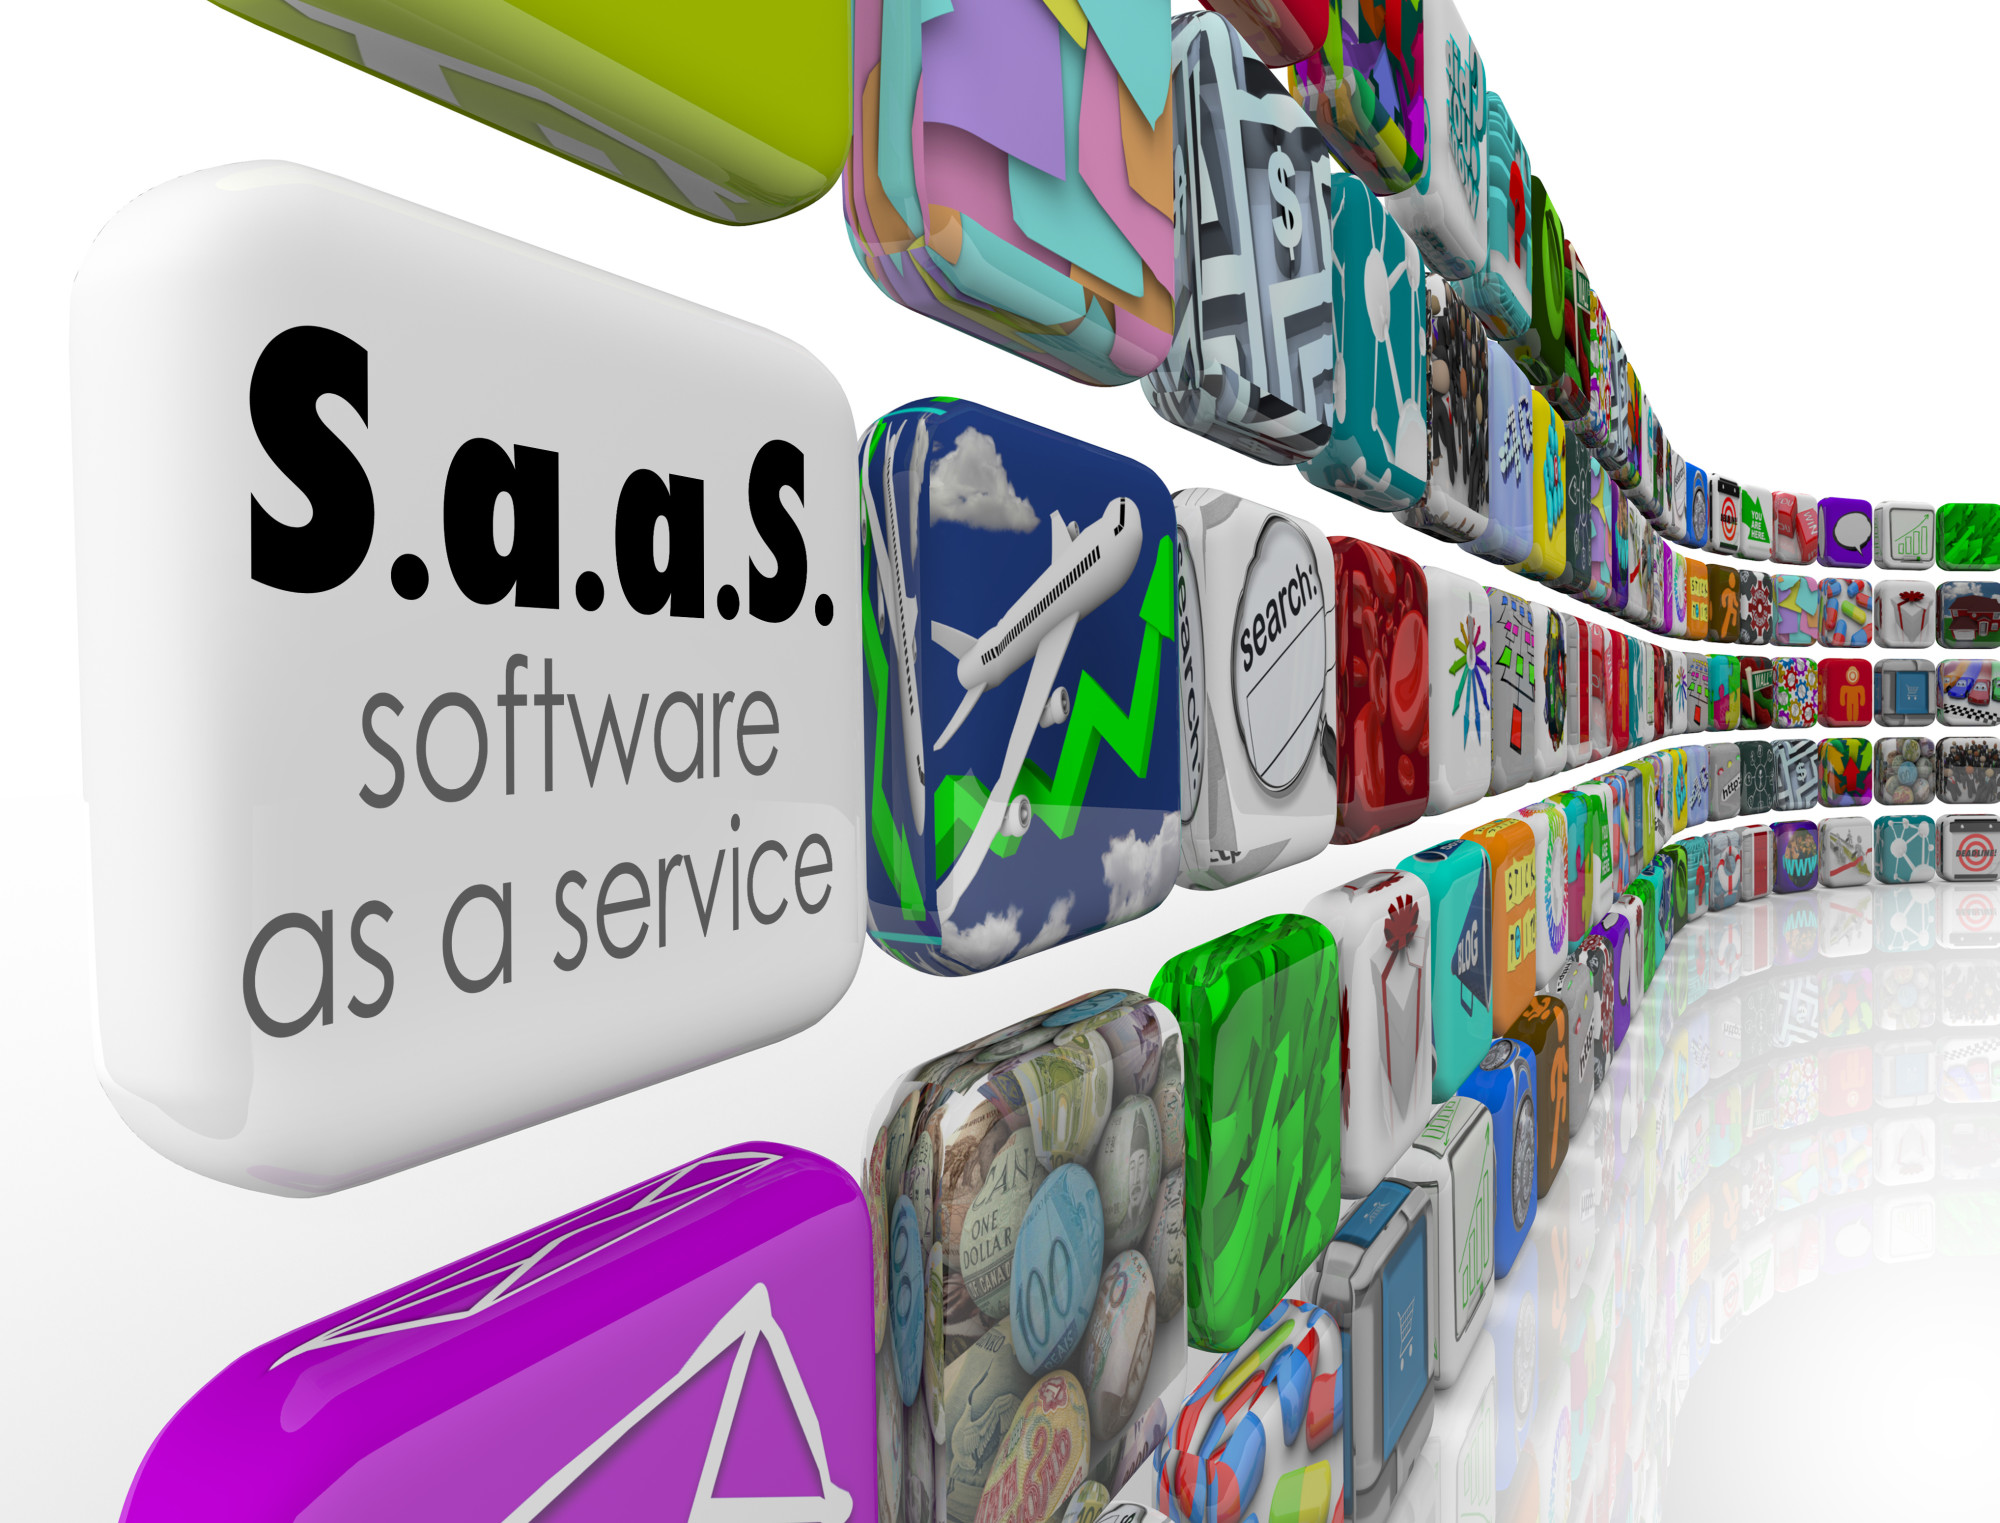 Weighing Your Options: How to Choose the Right SaaS Provider for Your Business